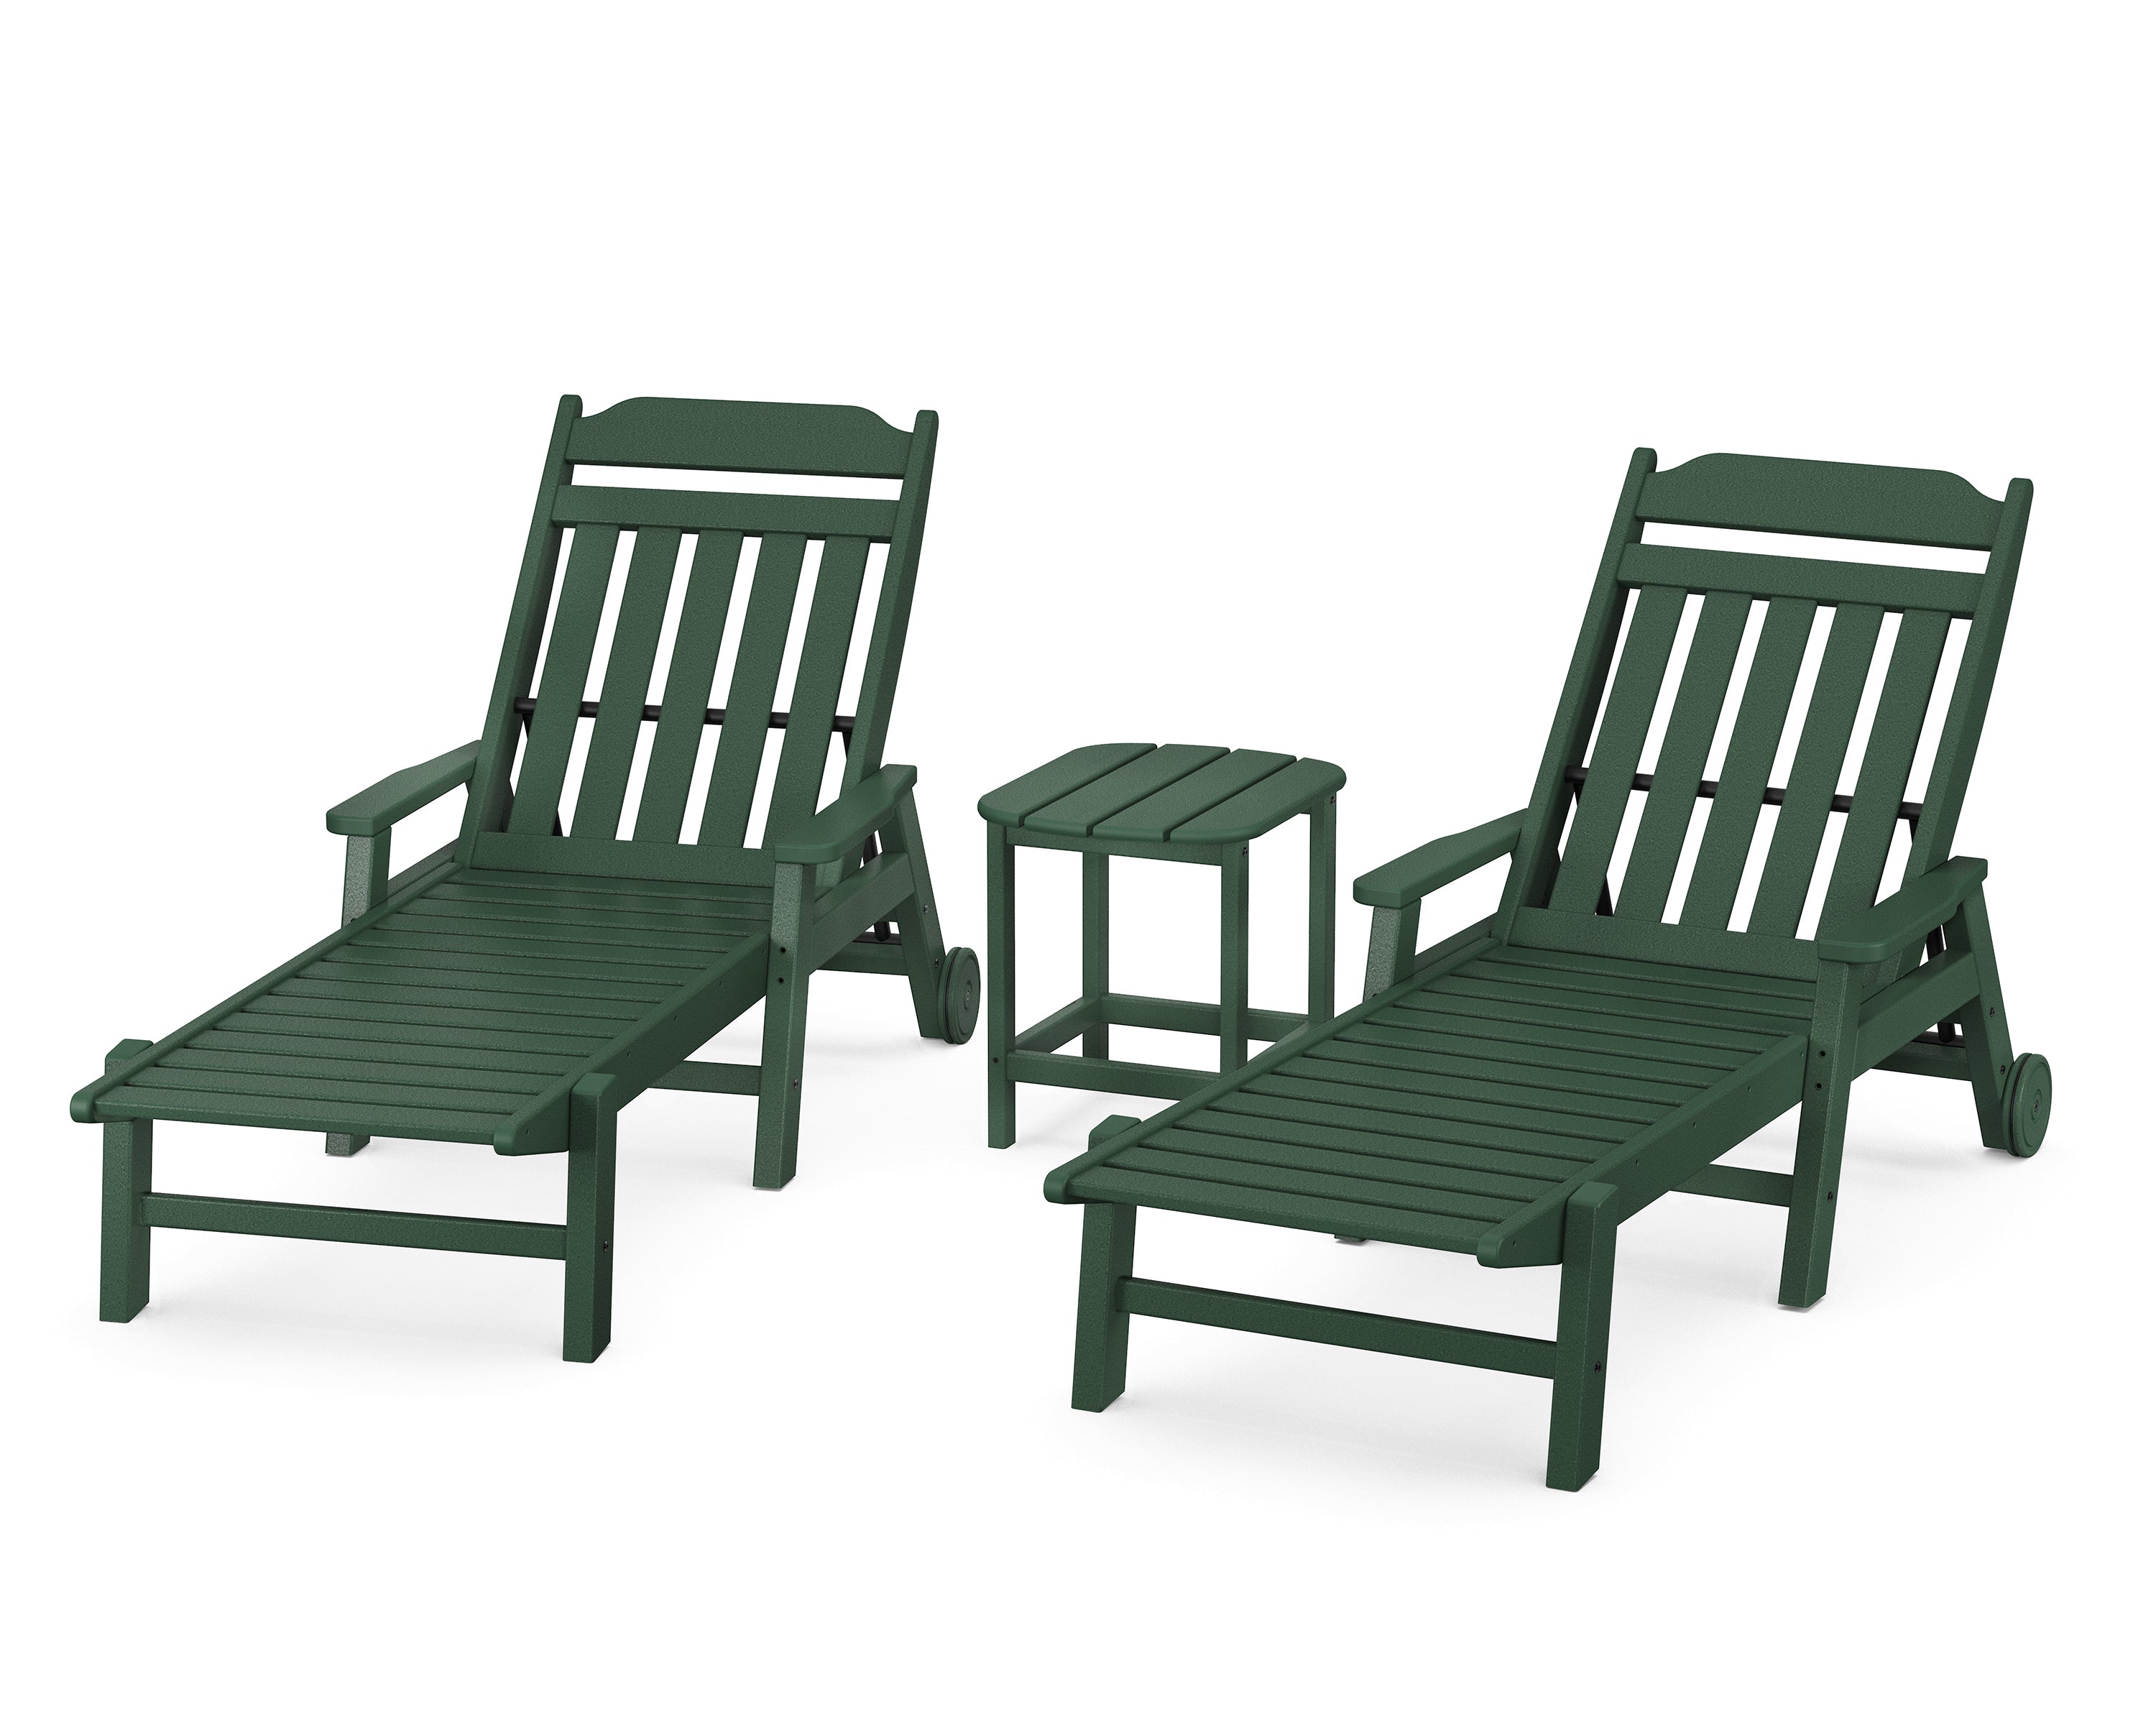 POLYWOOD Country Living 3-Piece Chaise Set with Arms and Wheels in Green